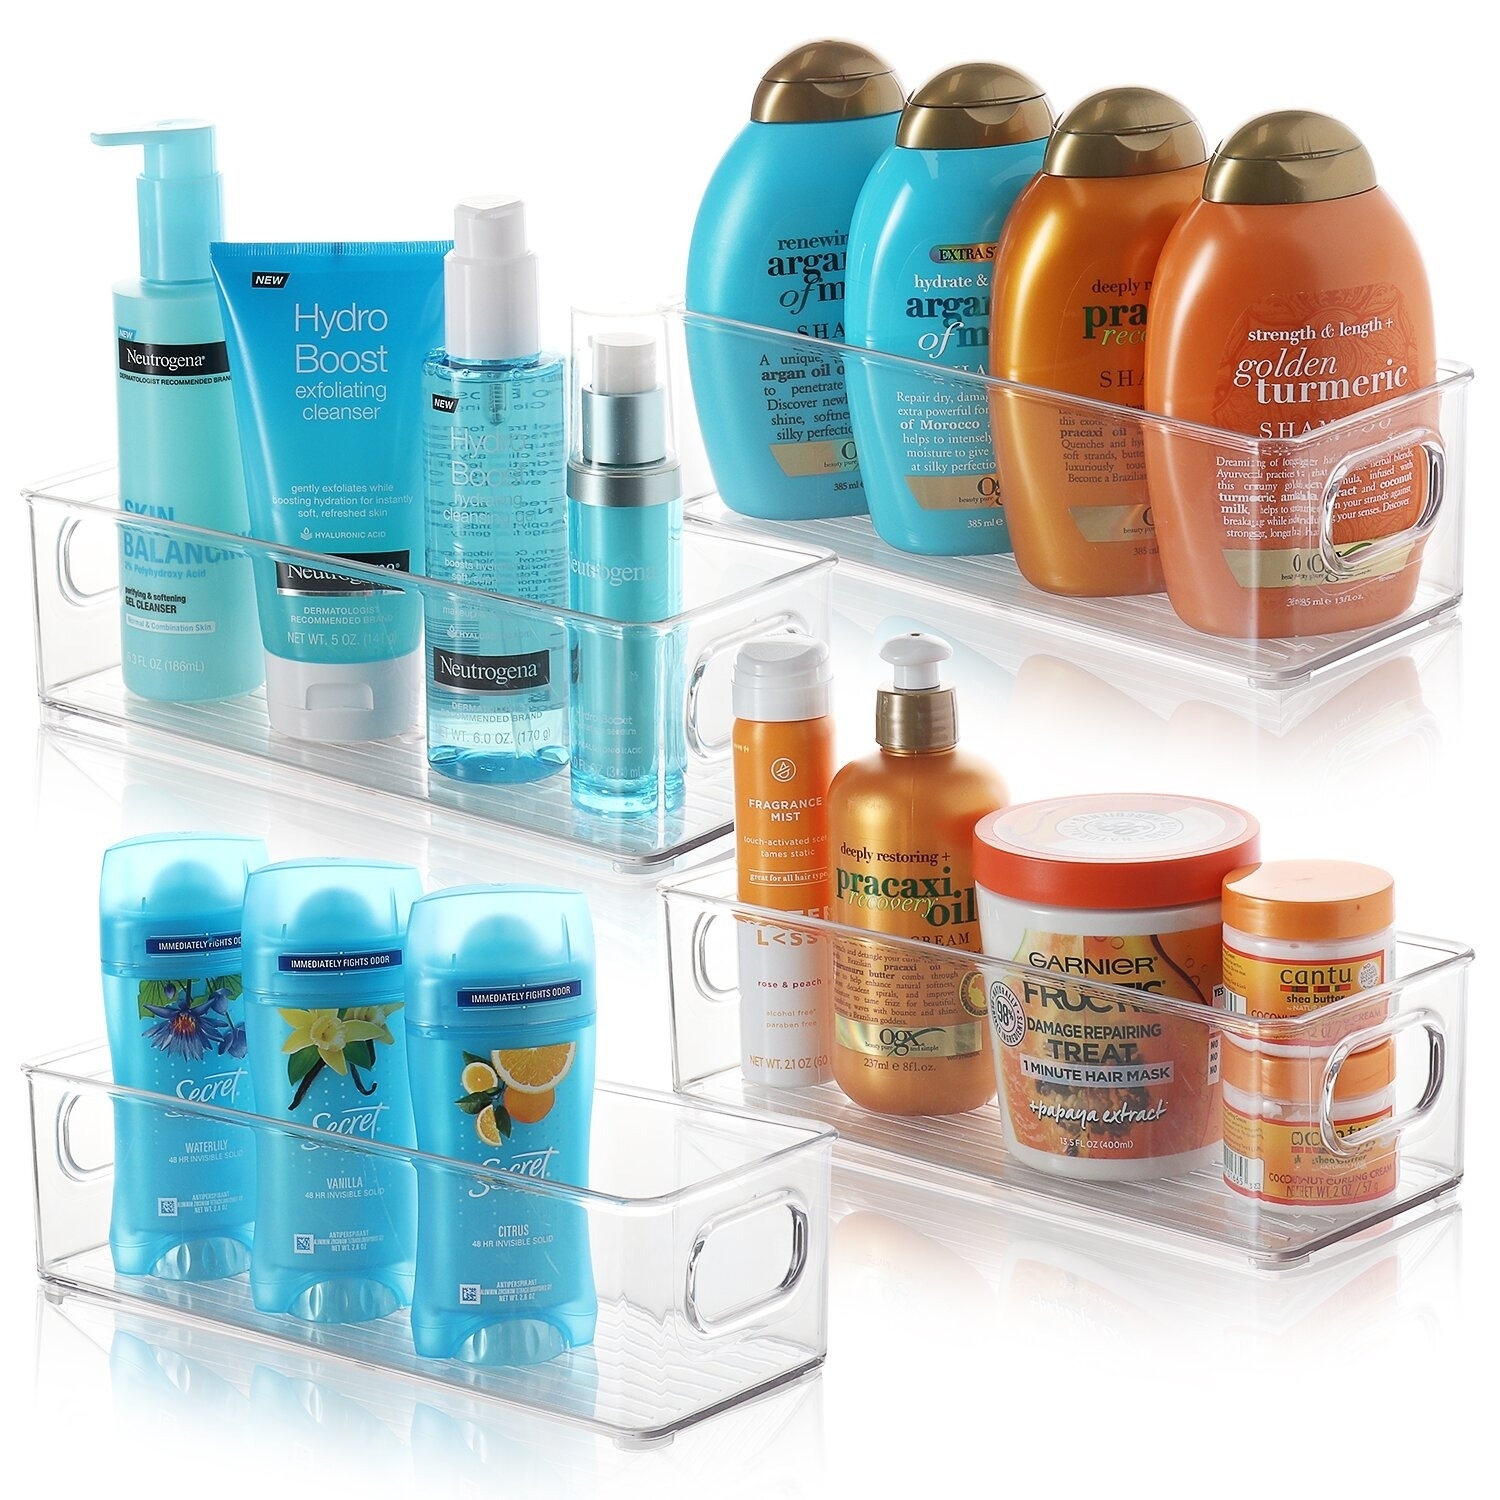 the clear storage containers with handles holding various items